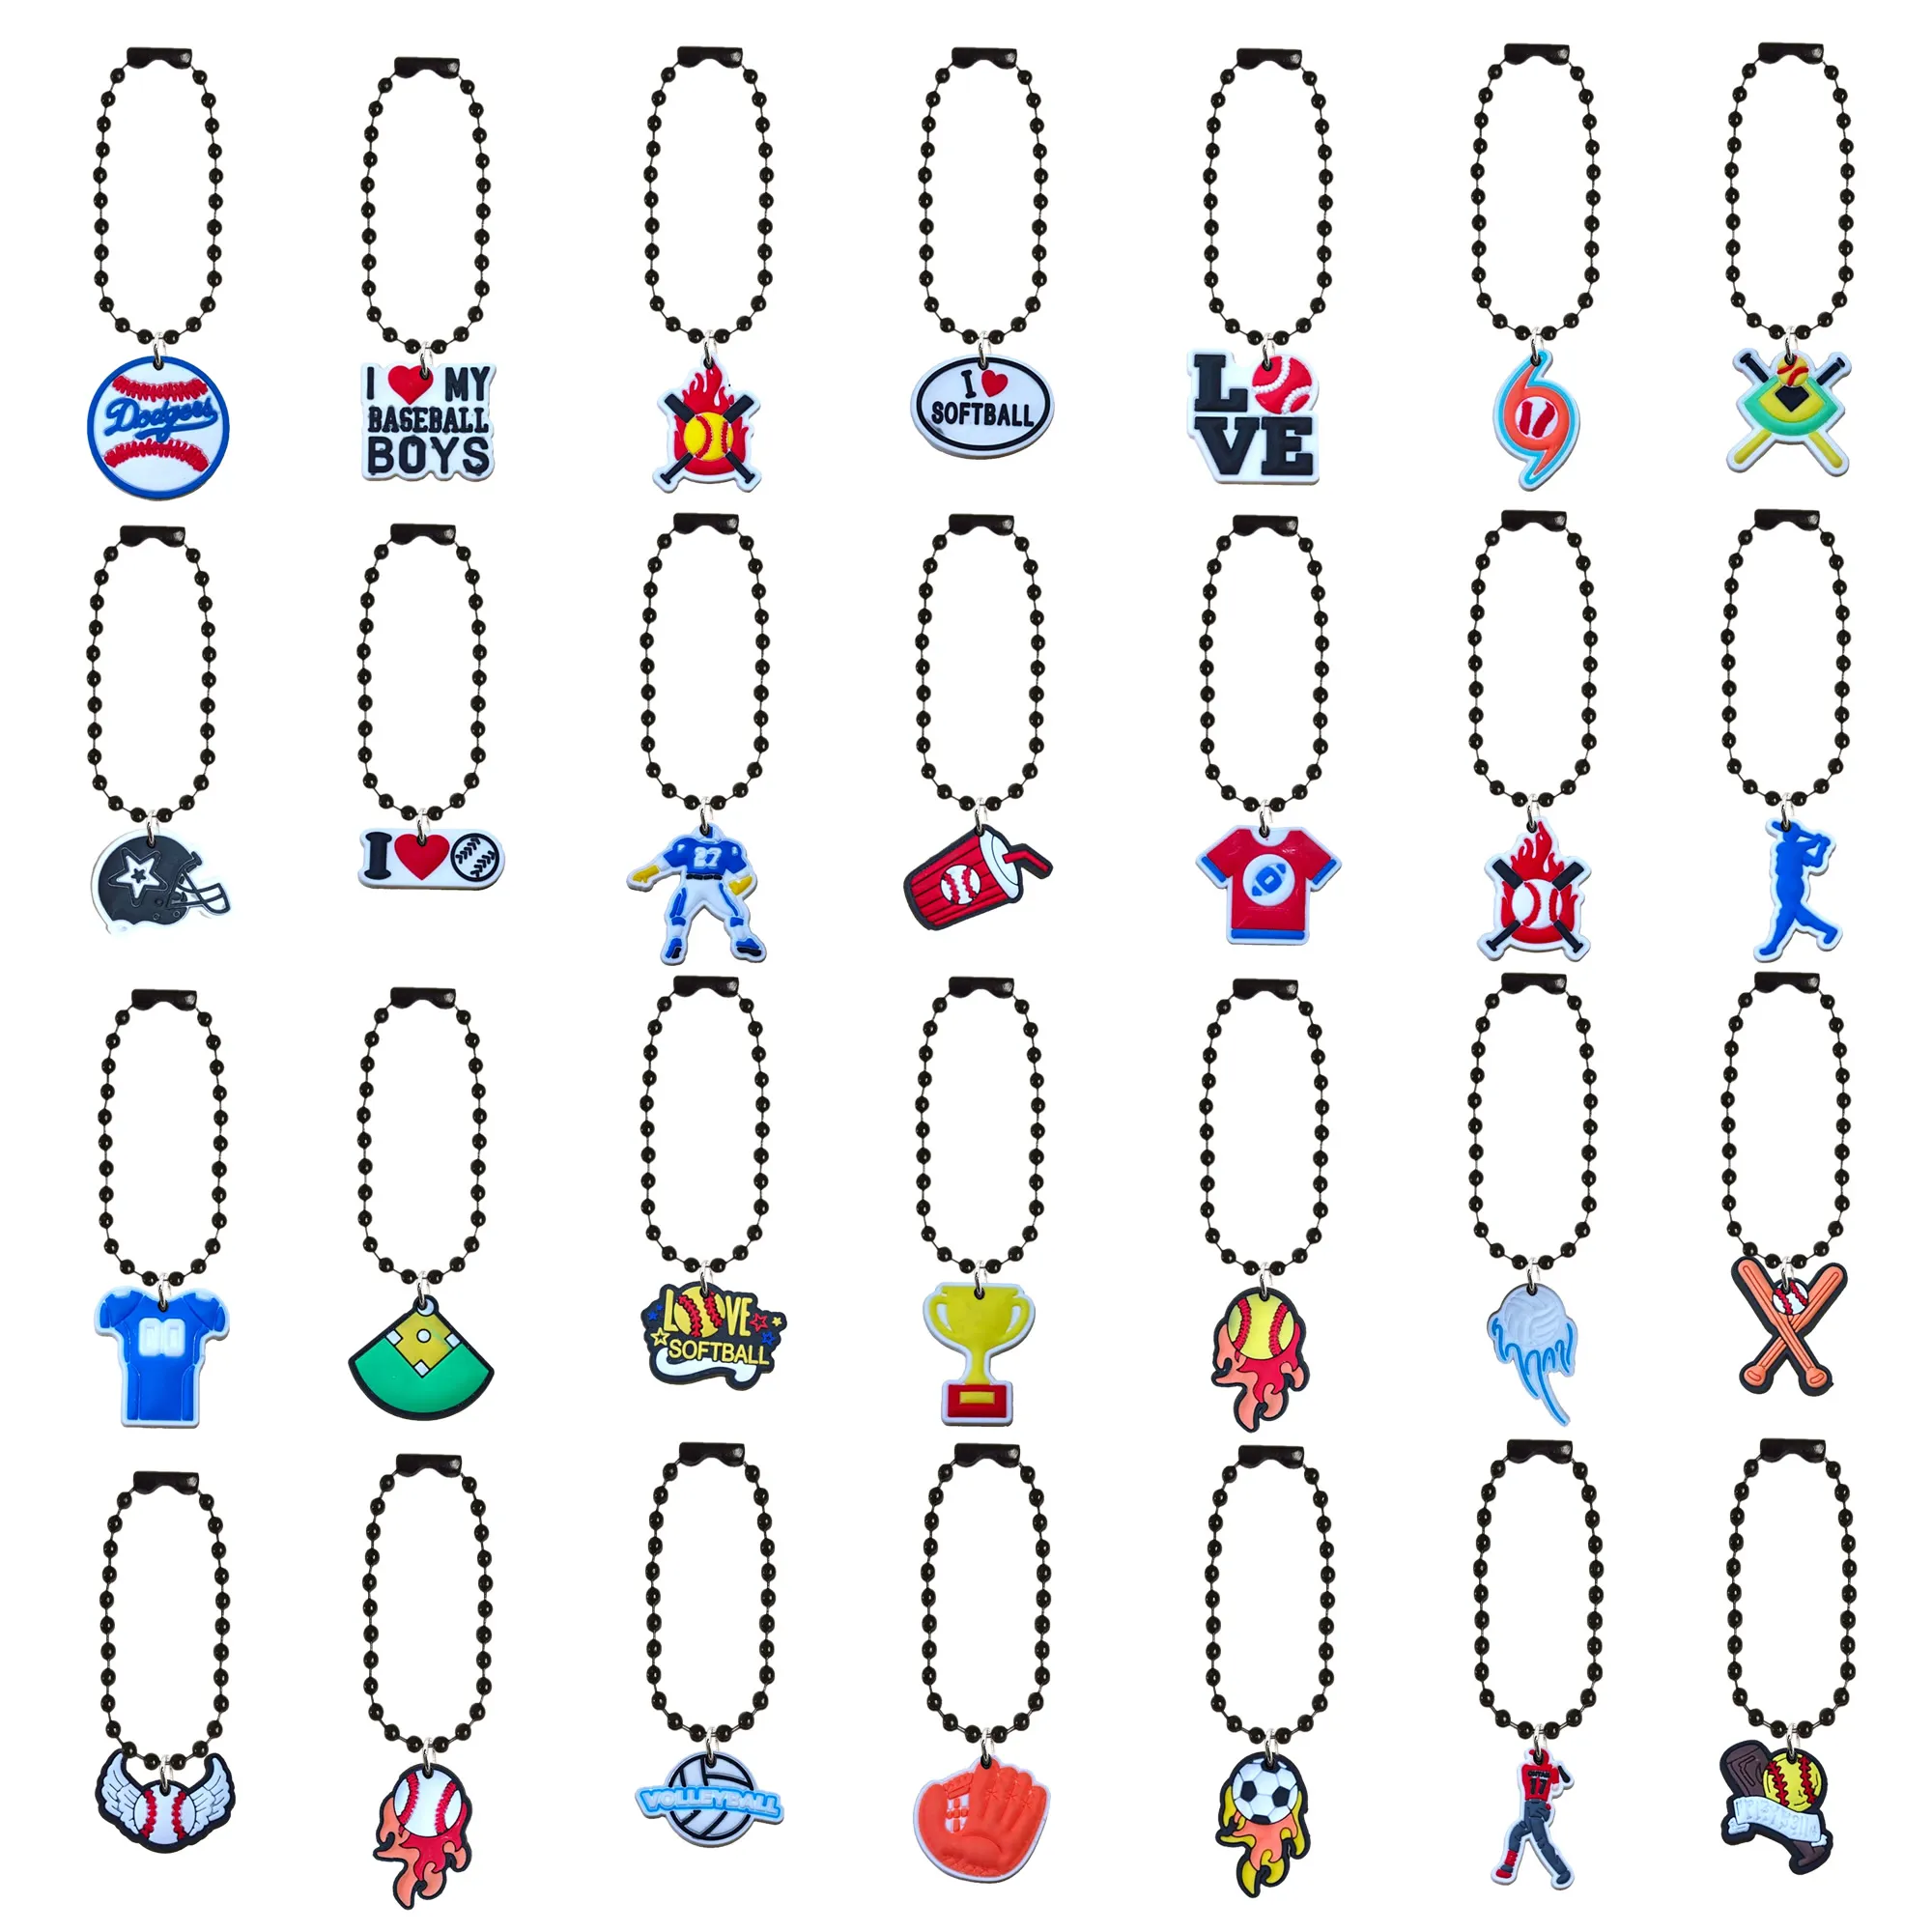 cartoon keychain bead keychains blue charm key ring hanging chain jewelry accessories for bags girls bracelet shoes